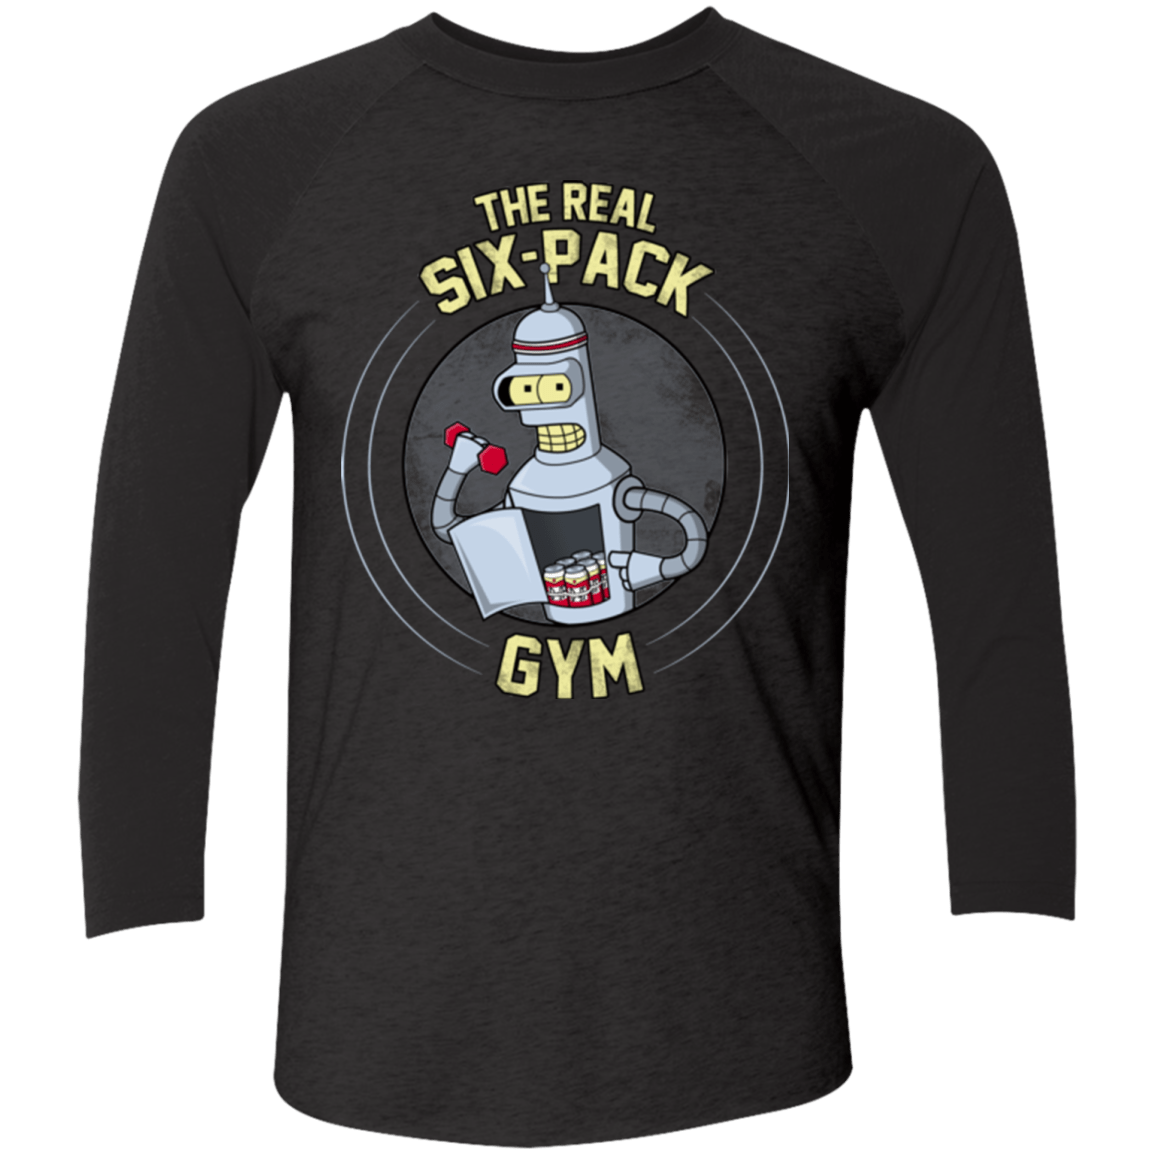 T-Shirts Vintage Black/Vintage Black / X-Small The Real Six Pack Men's Triblend 3/4 Sleeve